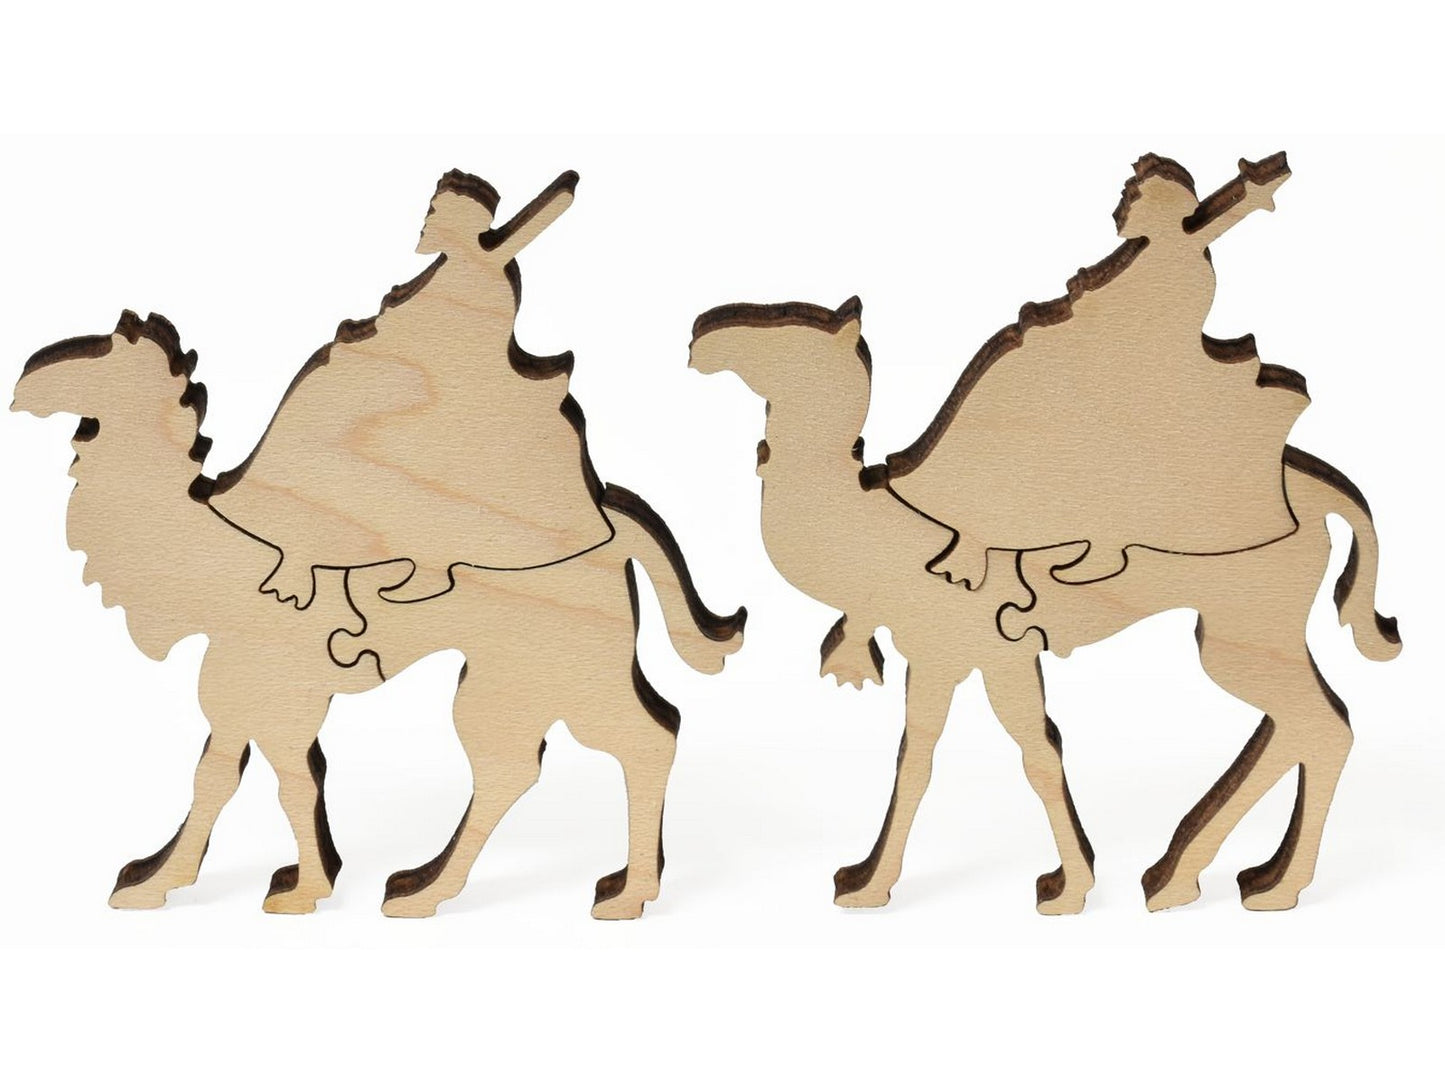 A closeup of pieces showing two people riding camels.